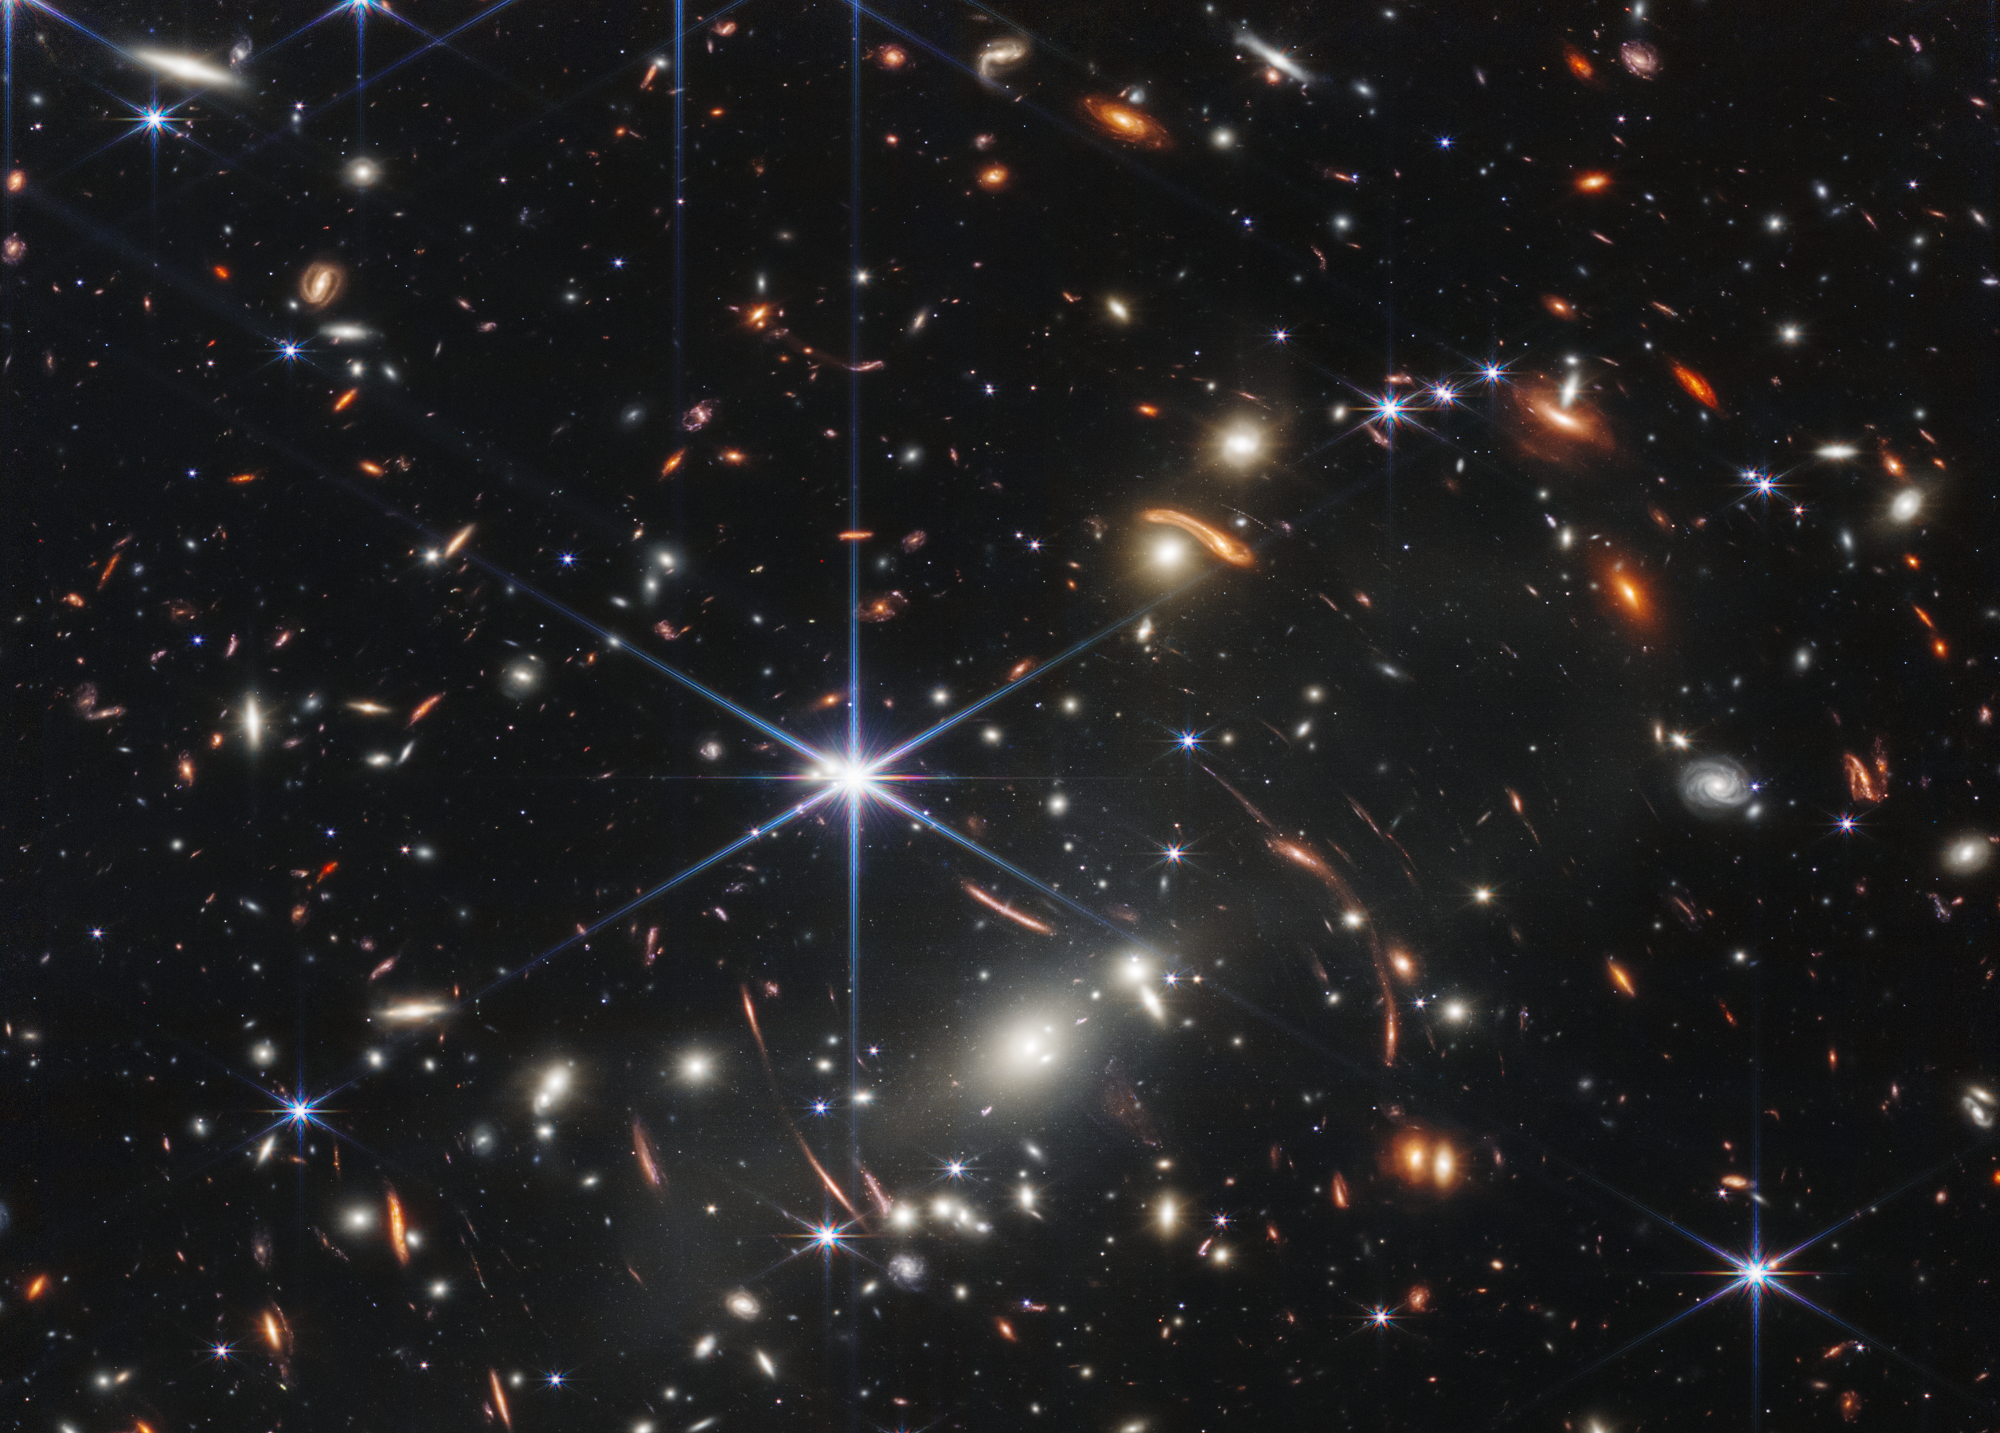 Deepest image of space with twinkling stars captured by James Webb Space Telescope